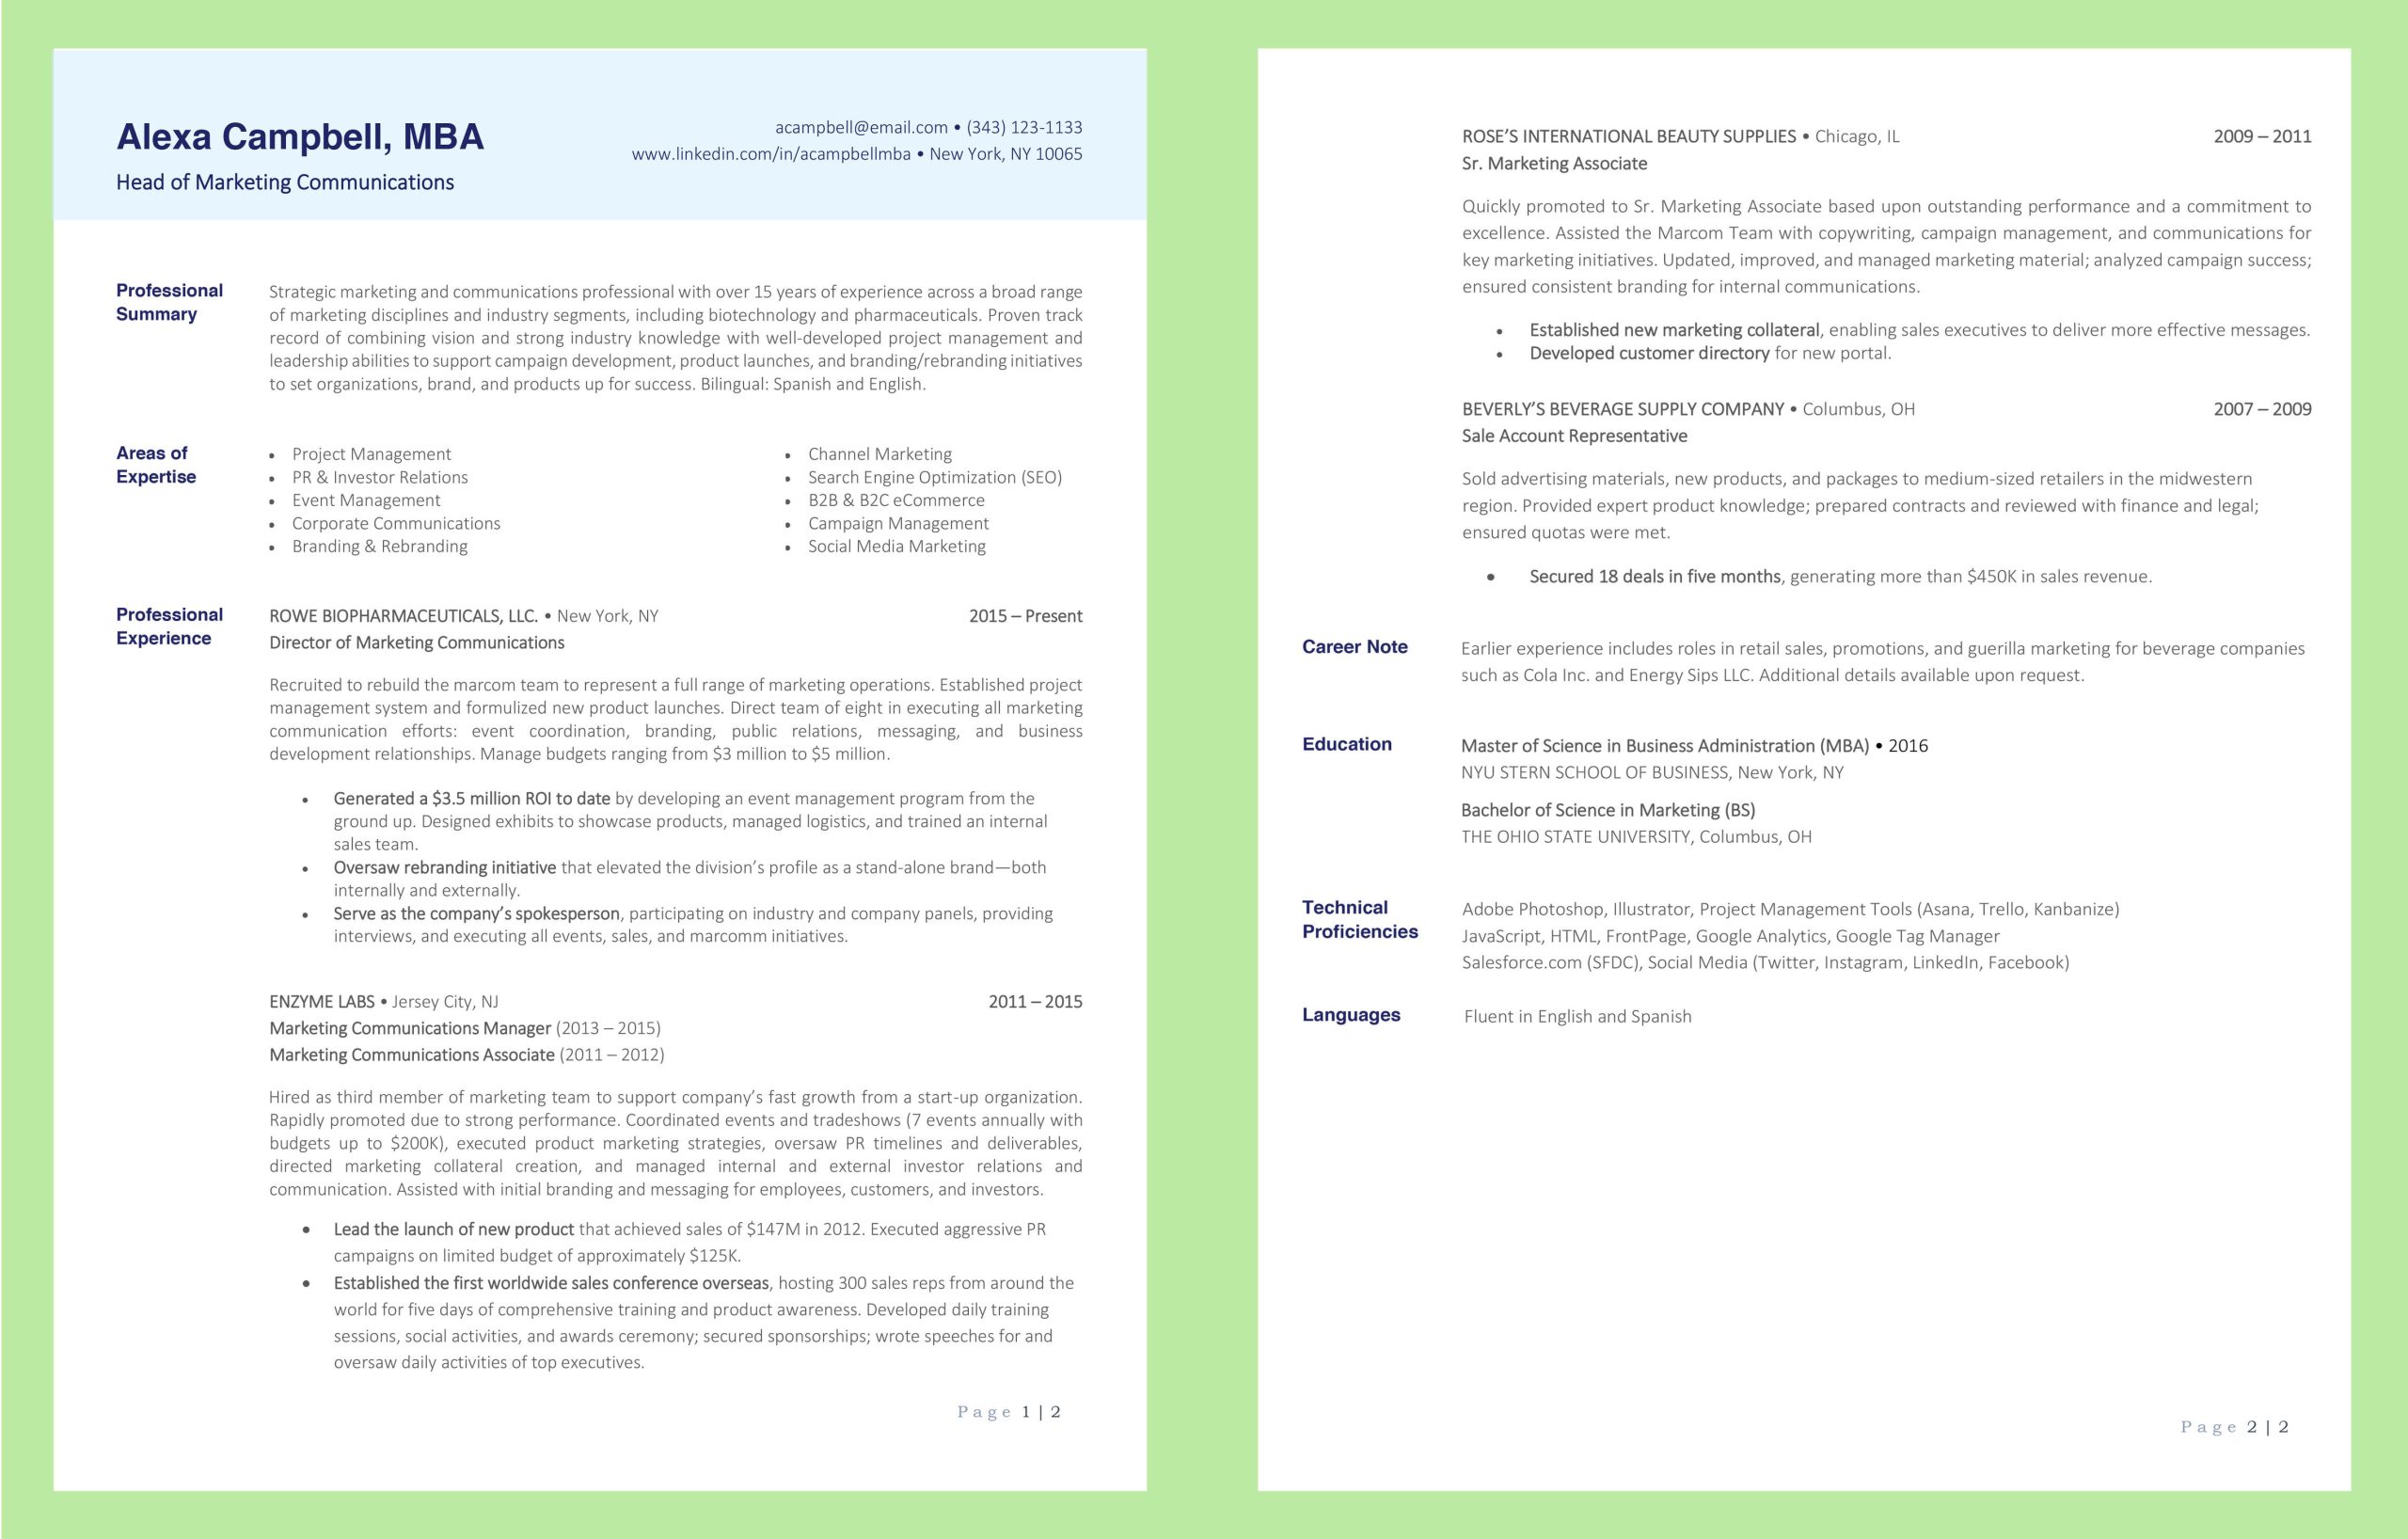 Sample Resume with More Than One Page A 2-page Resume isn’t Just Ok, It May even Be Betterâhere’s why